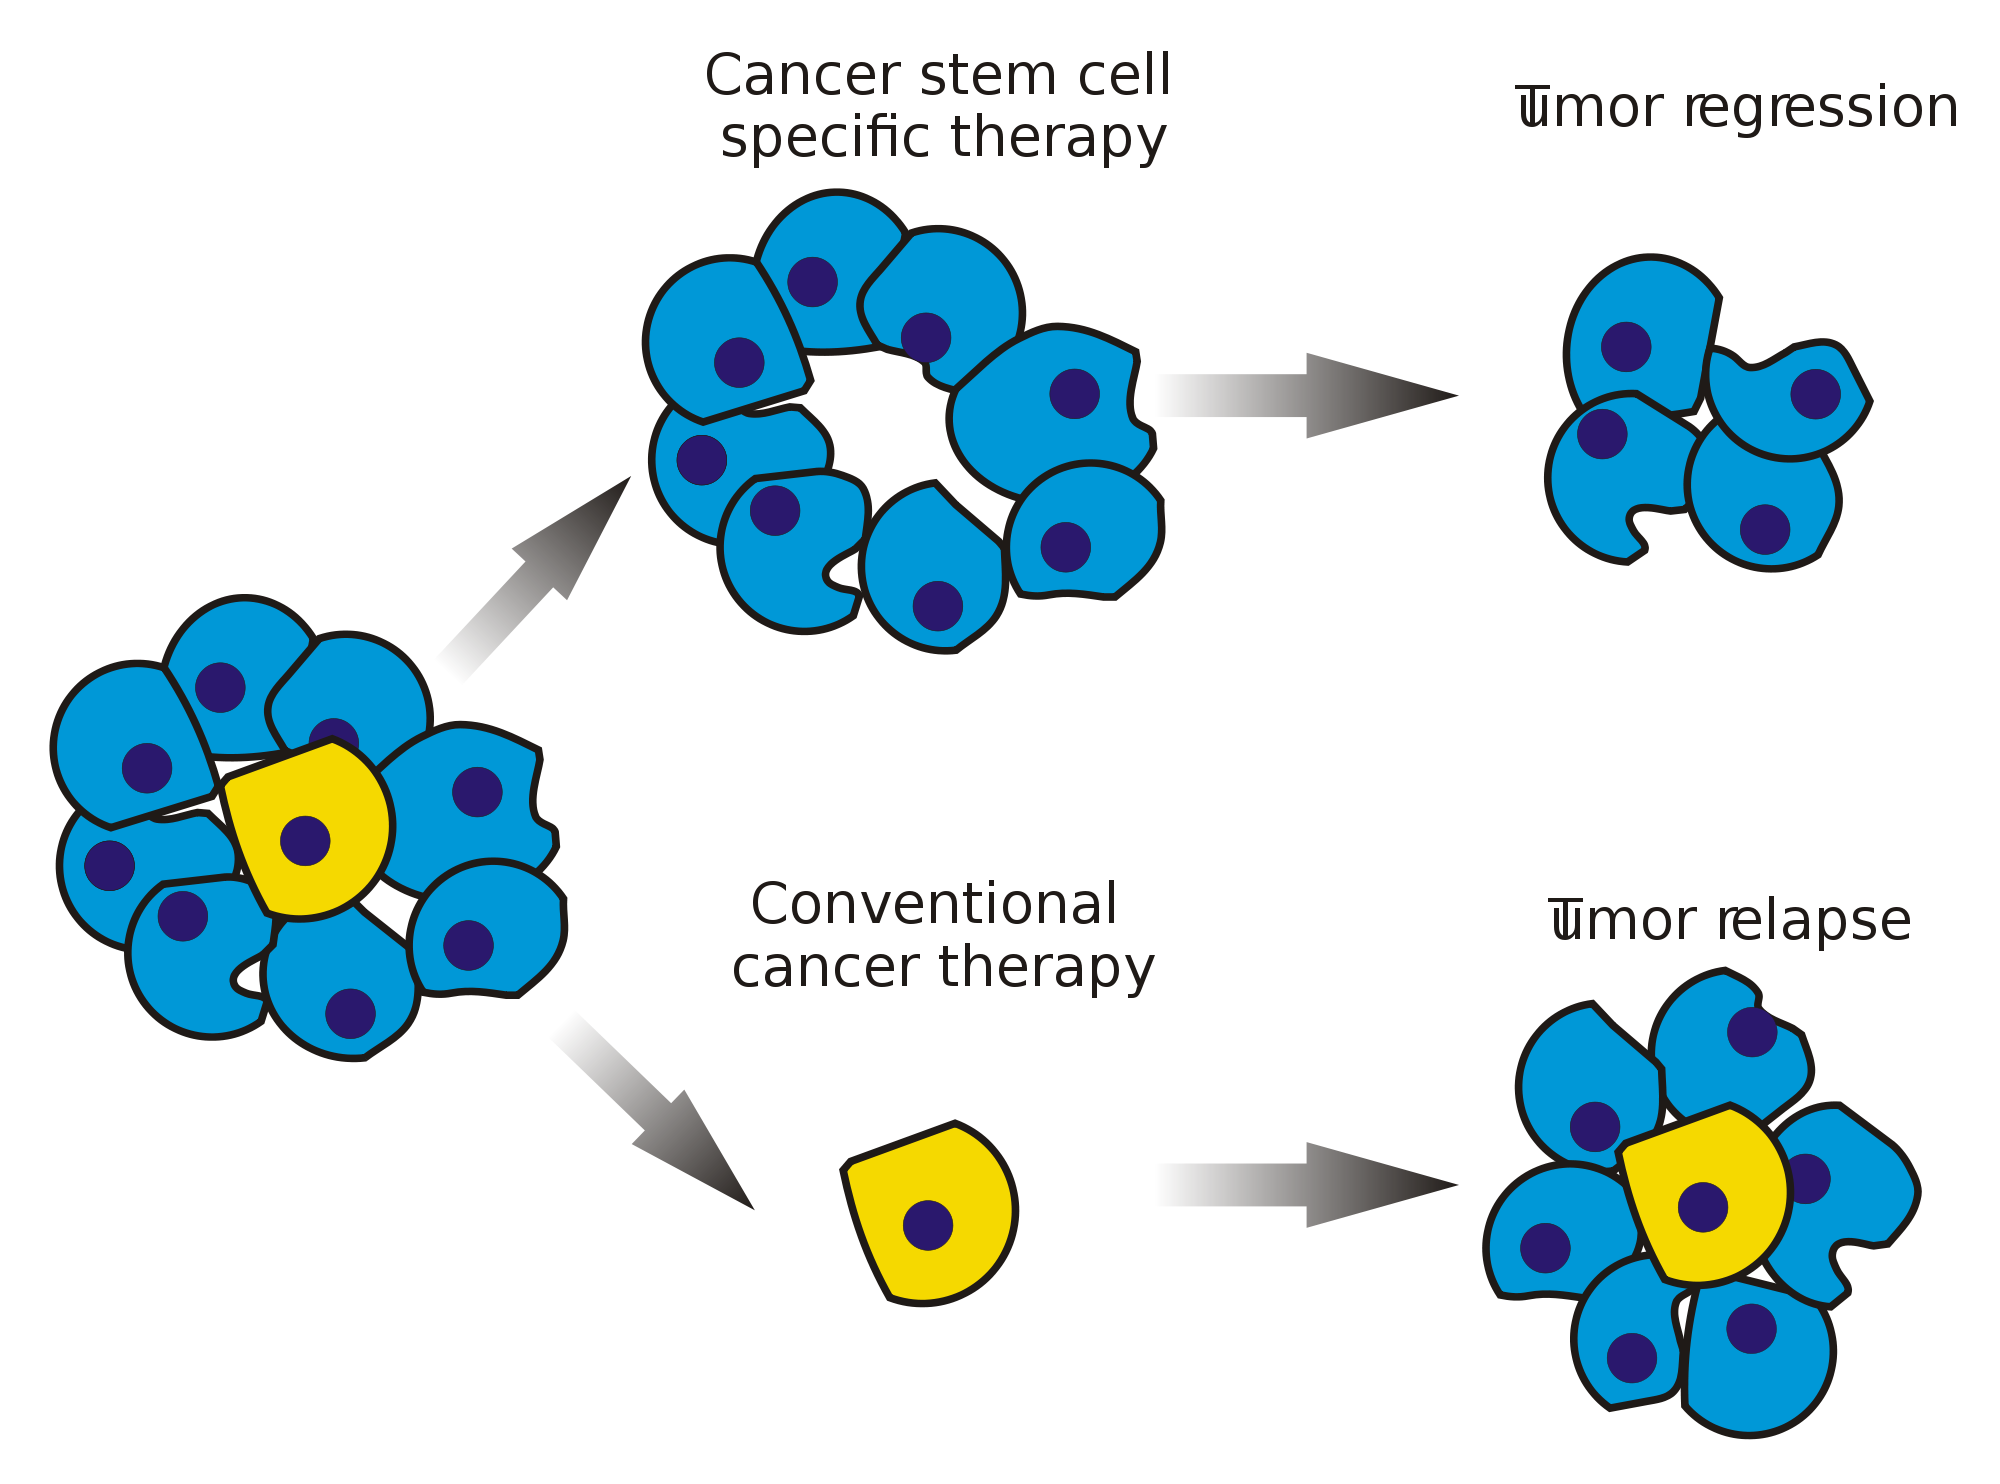 research topics on cancer stem cell